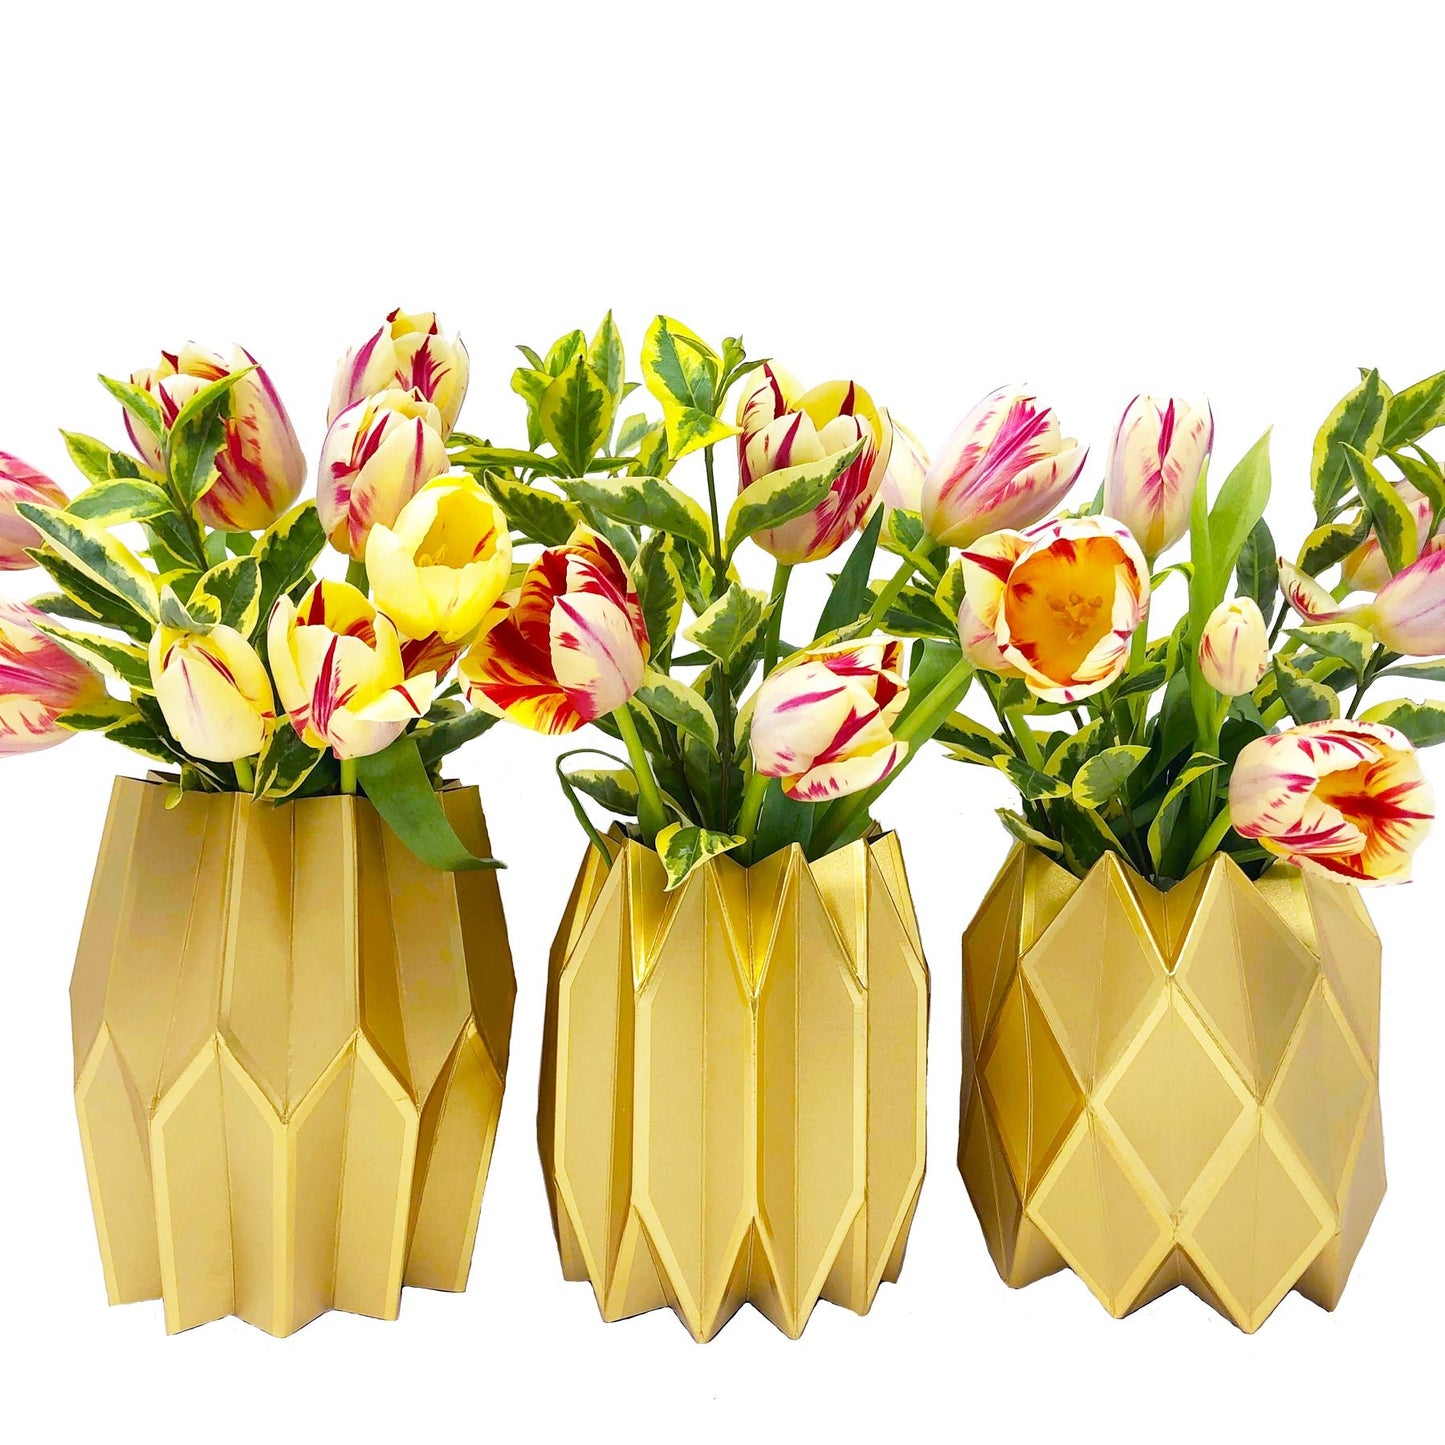 Gold paper sleeve vases with fall flowers